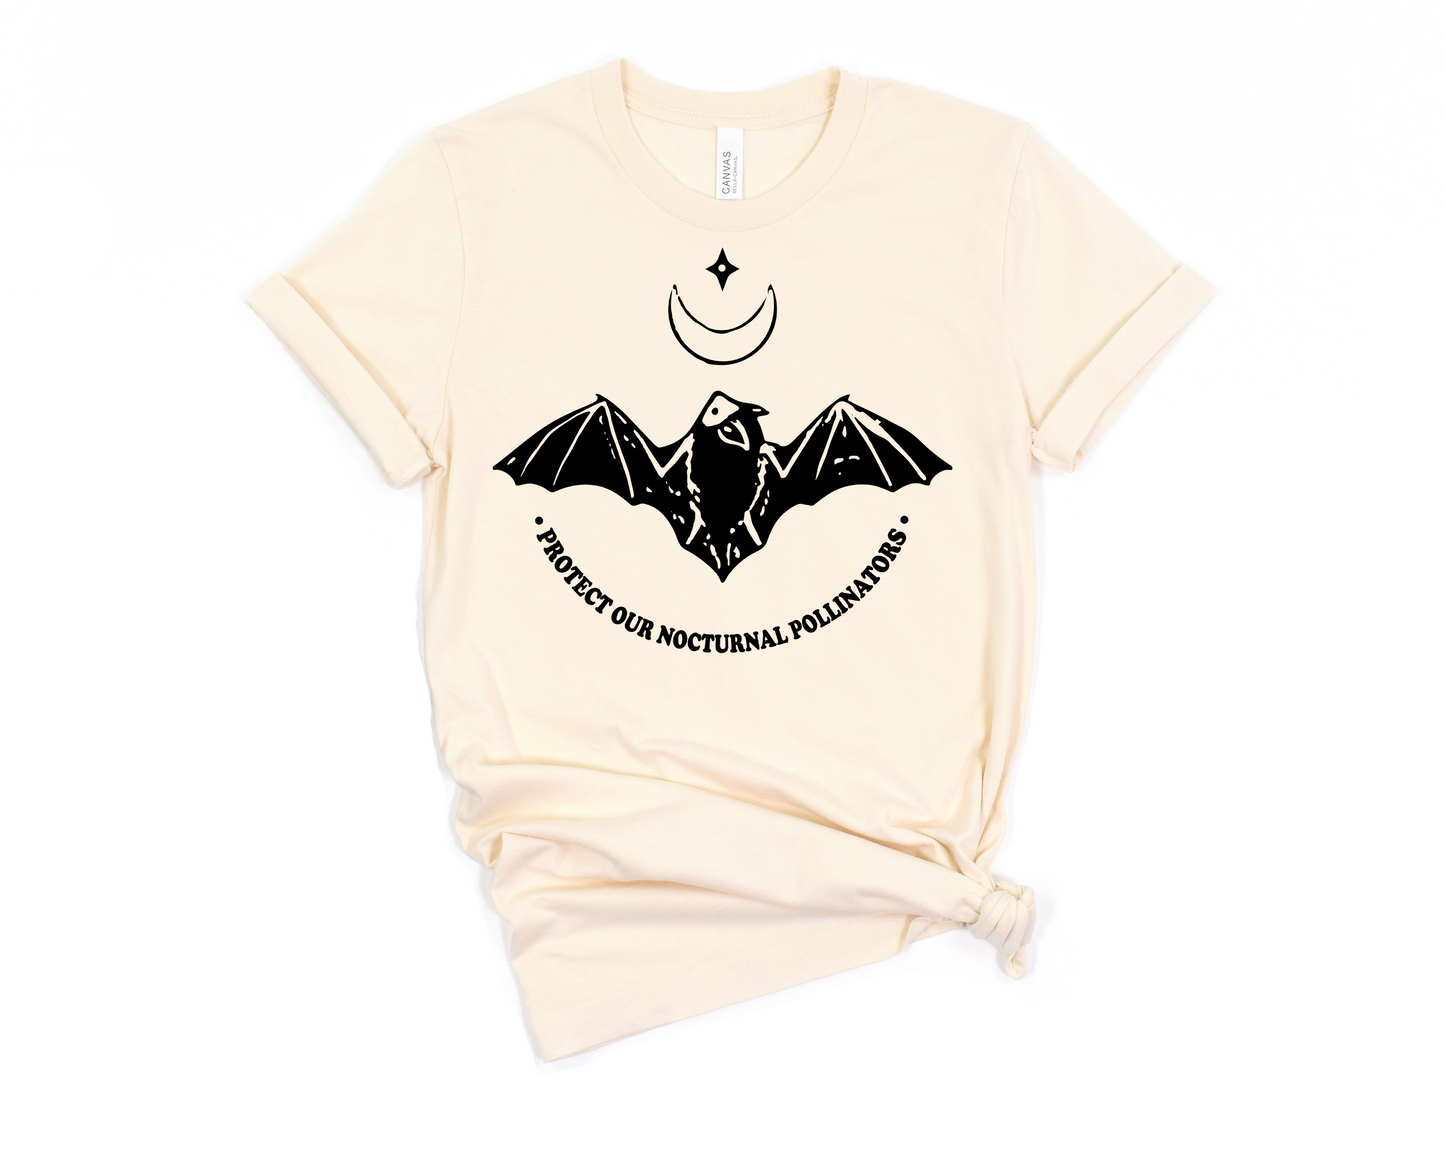 Protect Our Nocturnal Pollinators T-Shirt